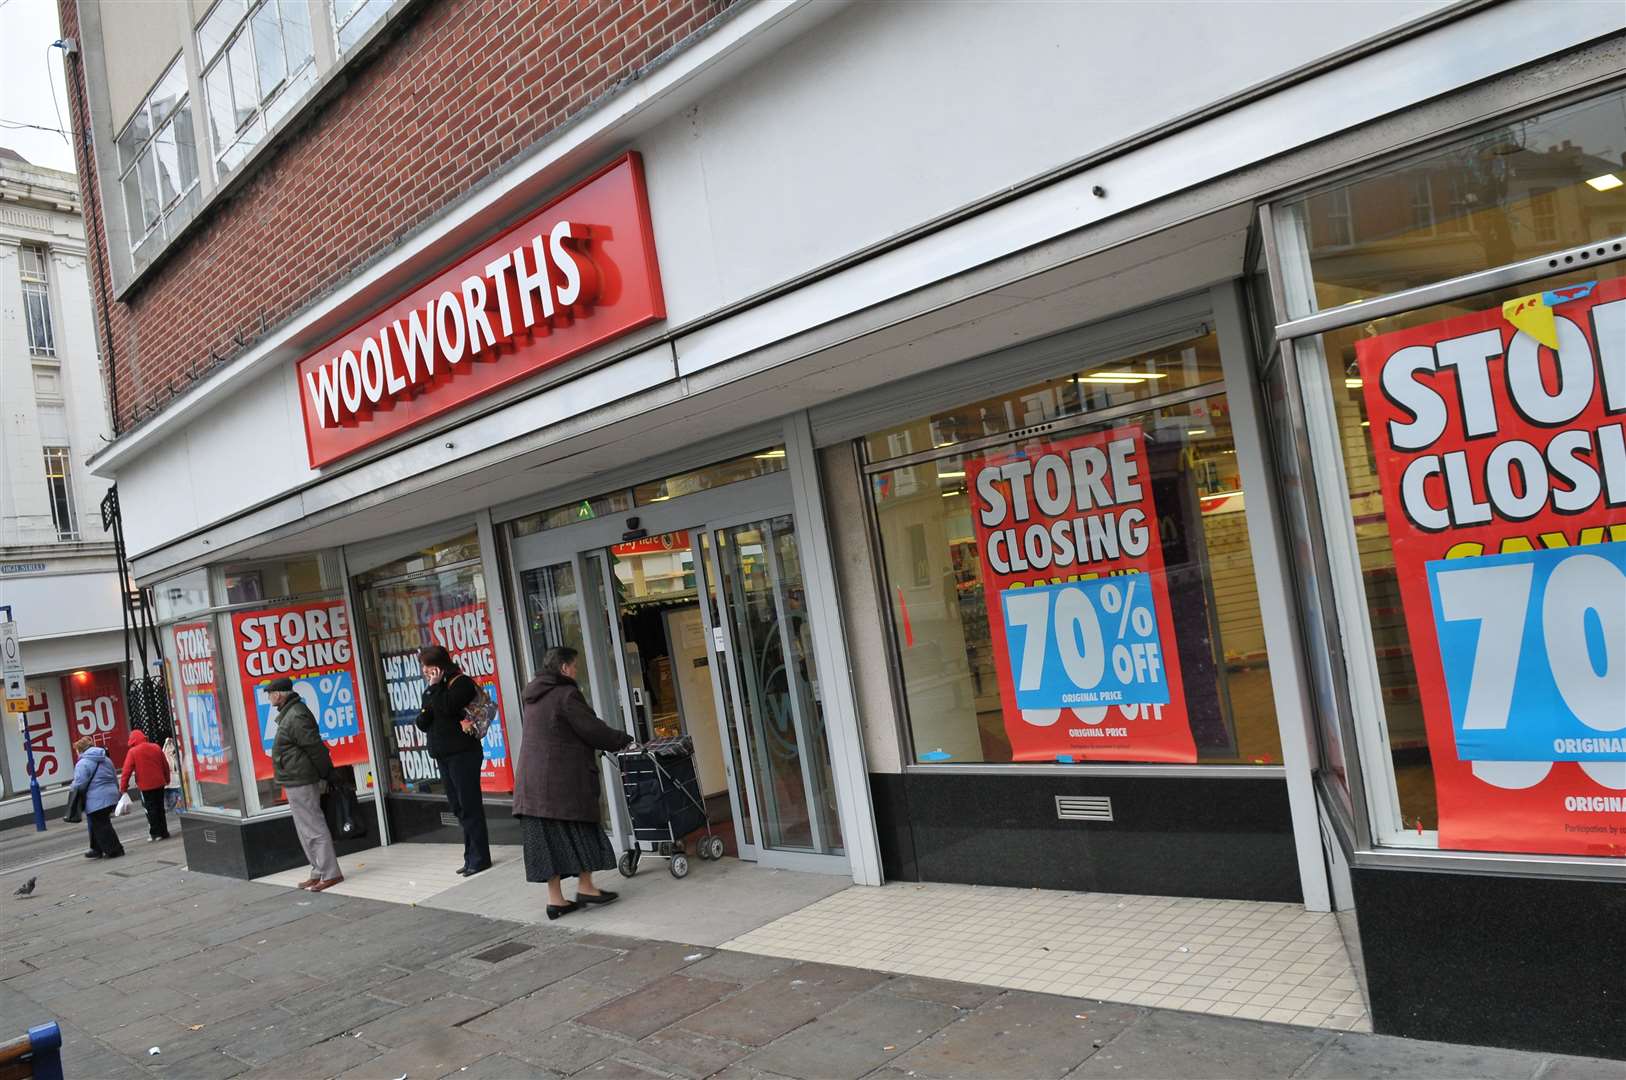 The collapse of Woolworths, which saw all its stores, including this one in Gravesend, close by early 2009 sent shockwaves around the nation's high streets. Picture: Nick Johnson